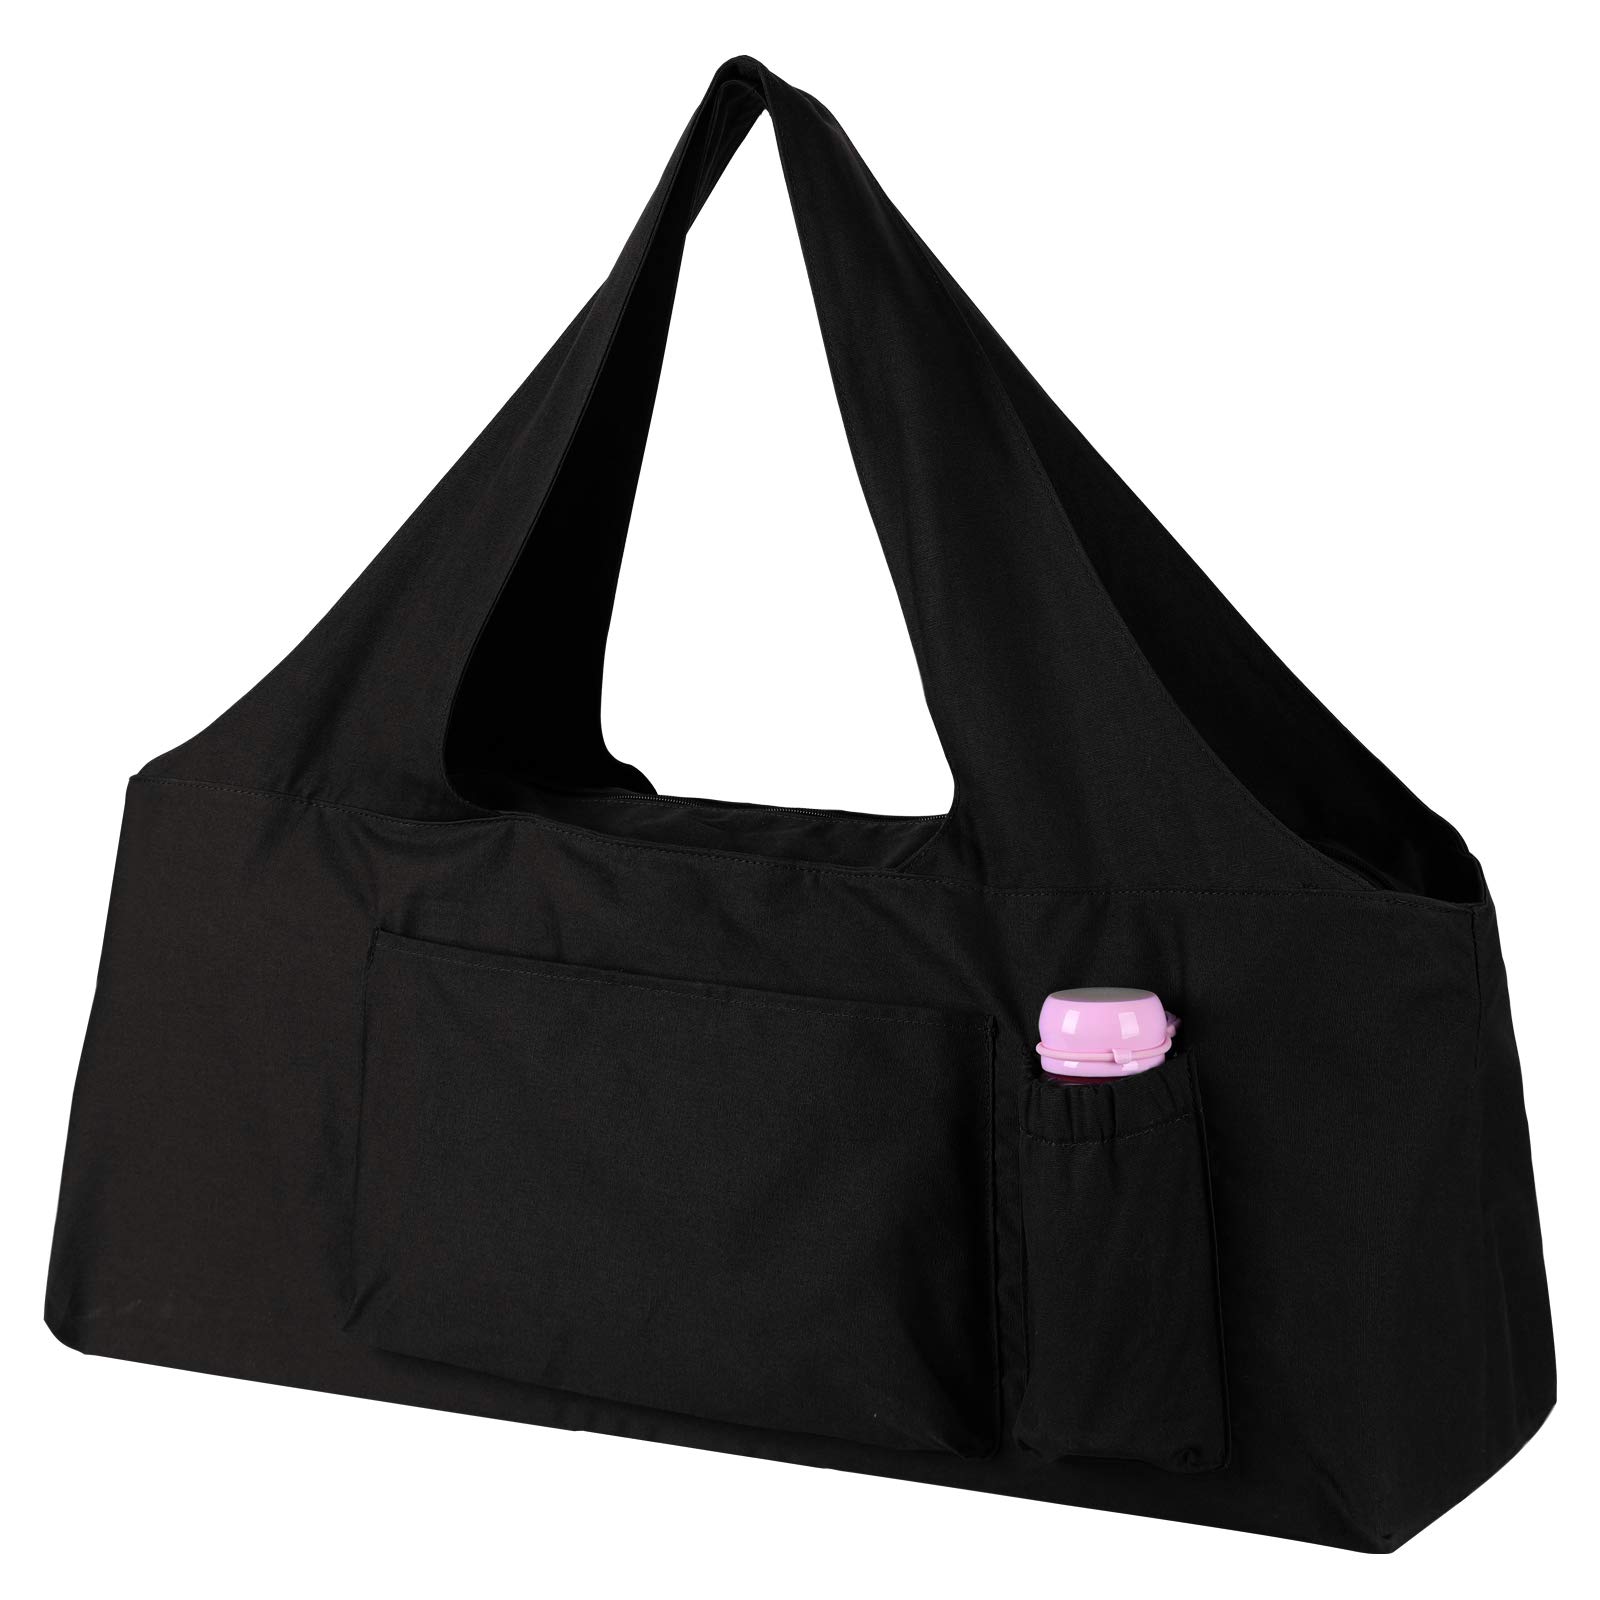 Yoga Mat Bag, Best YOGA BAG TOTE, This Yoga Mat Carrier is Made of Canvas  and Large Enough for All Your Gym Clothes and Mat. Canvas Yoga Bag -   Canada